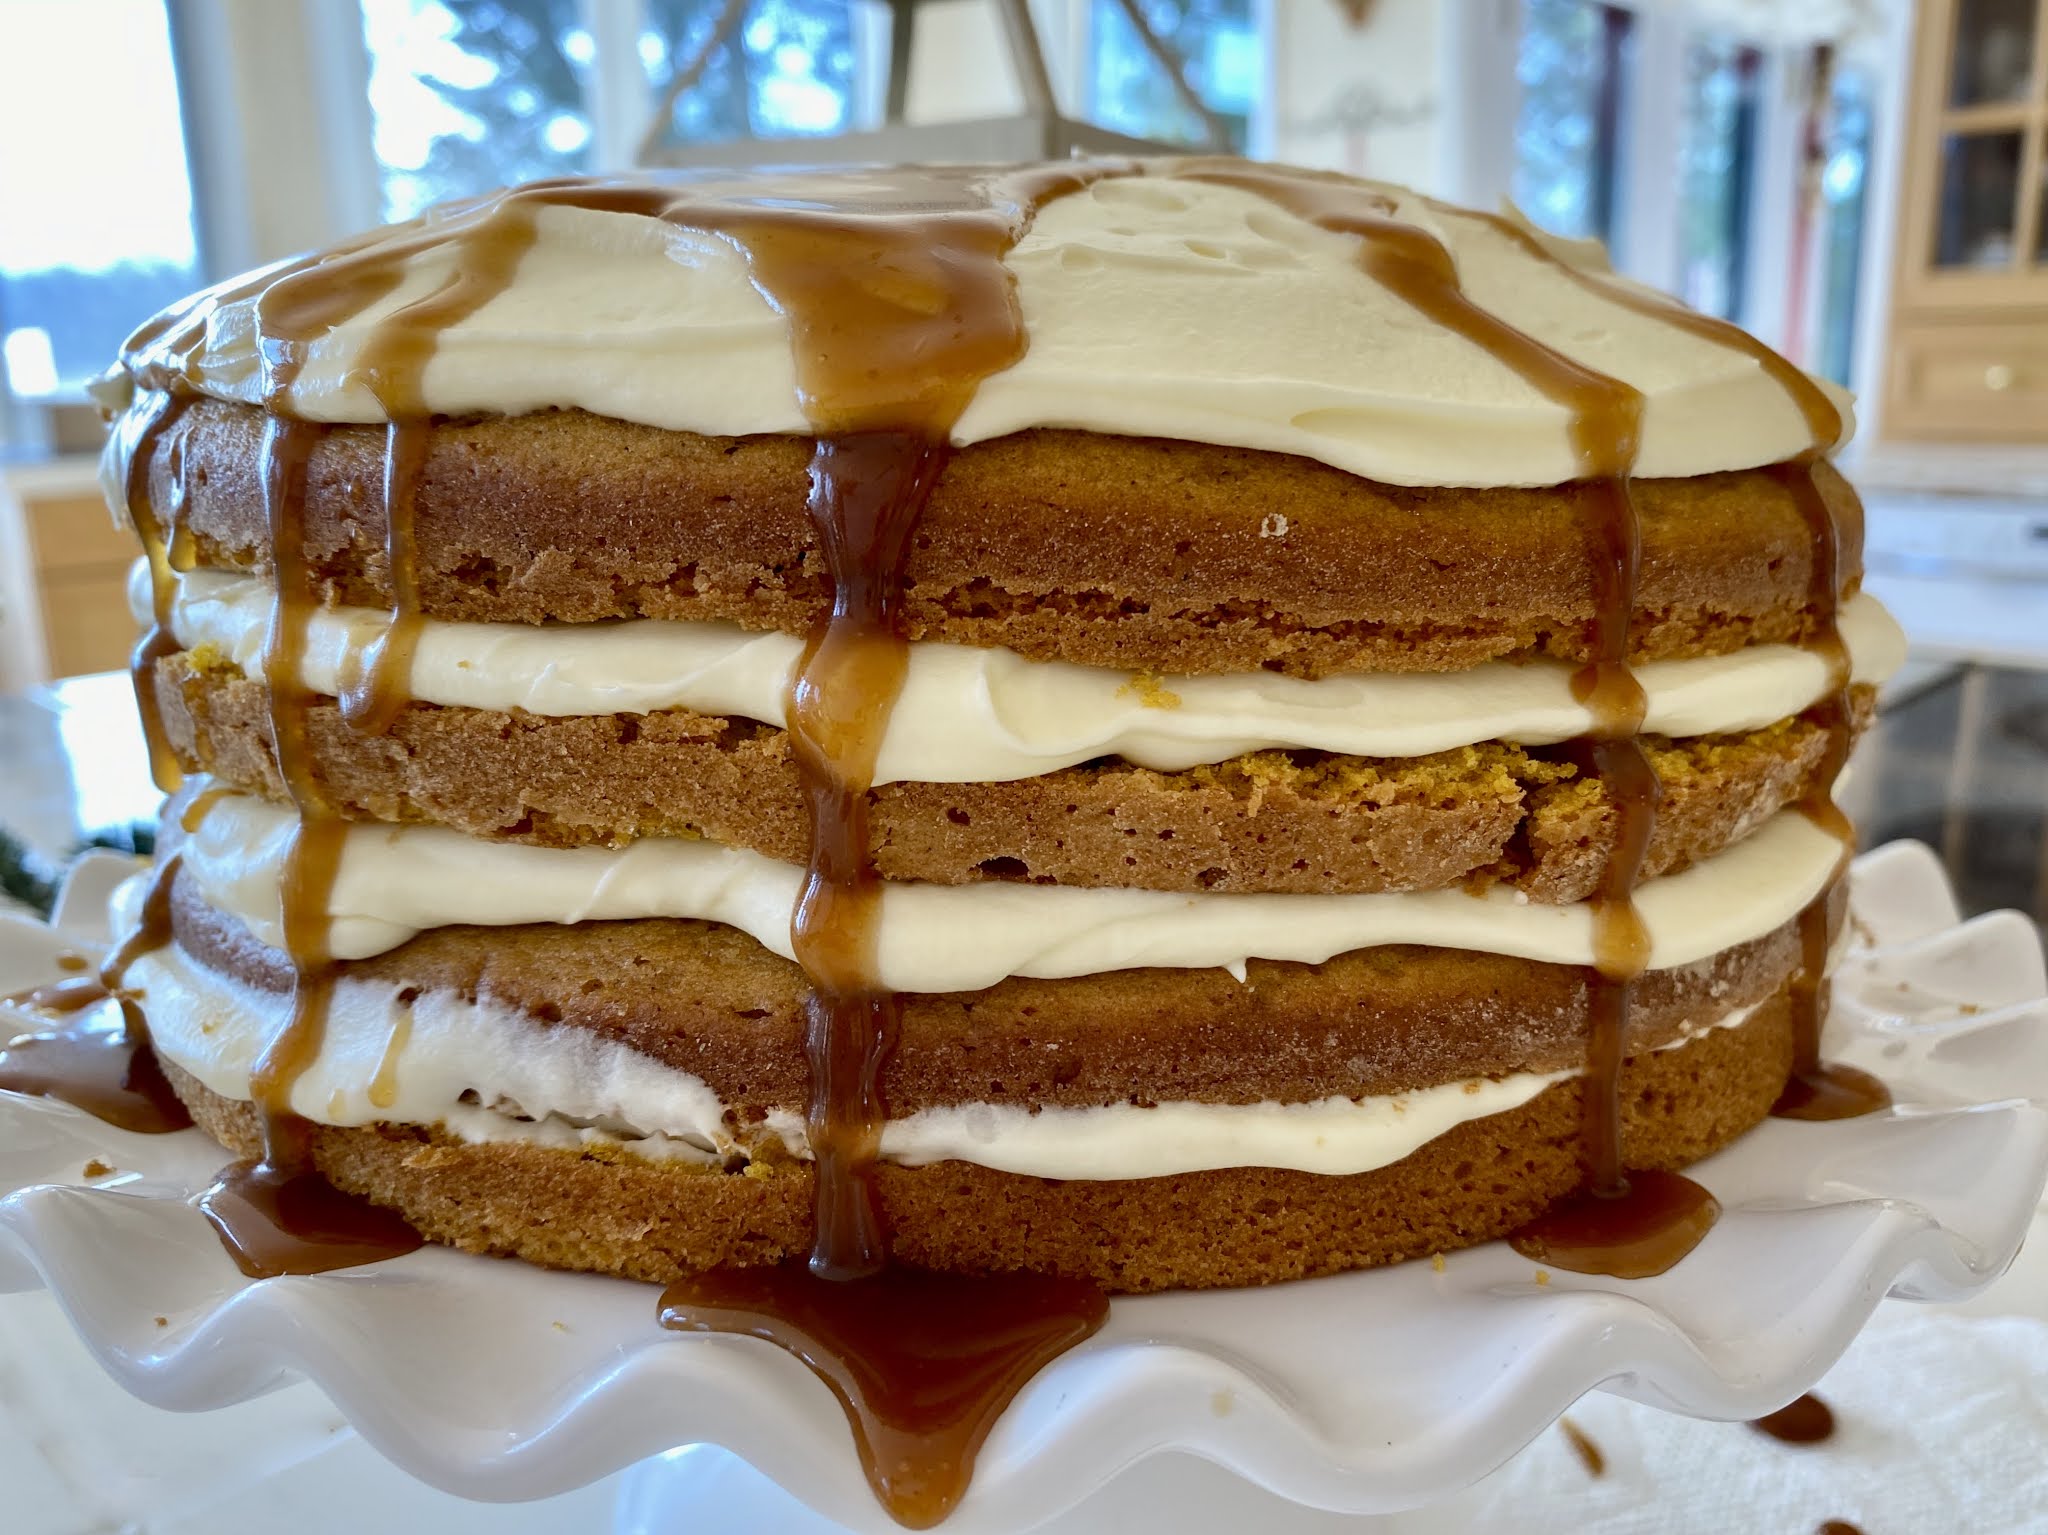 Mystery Lovers Kitchen Pumpkin Spice Cake With Cream Cheese Frosting And Caramel Sauce